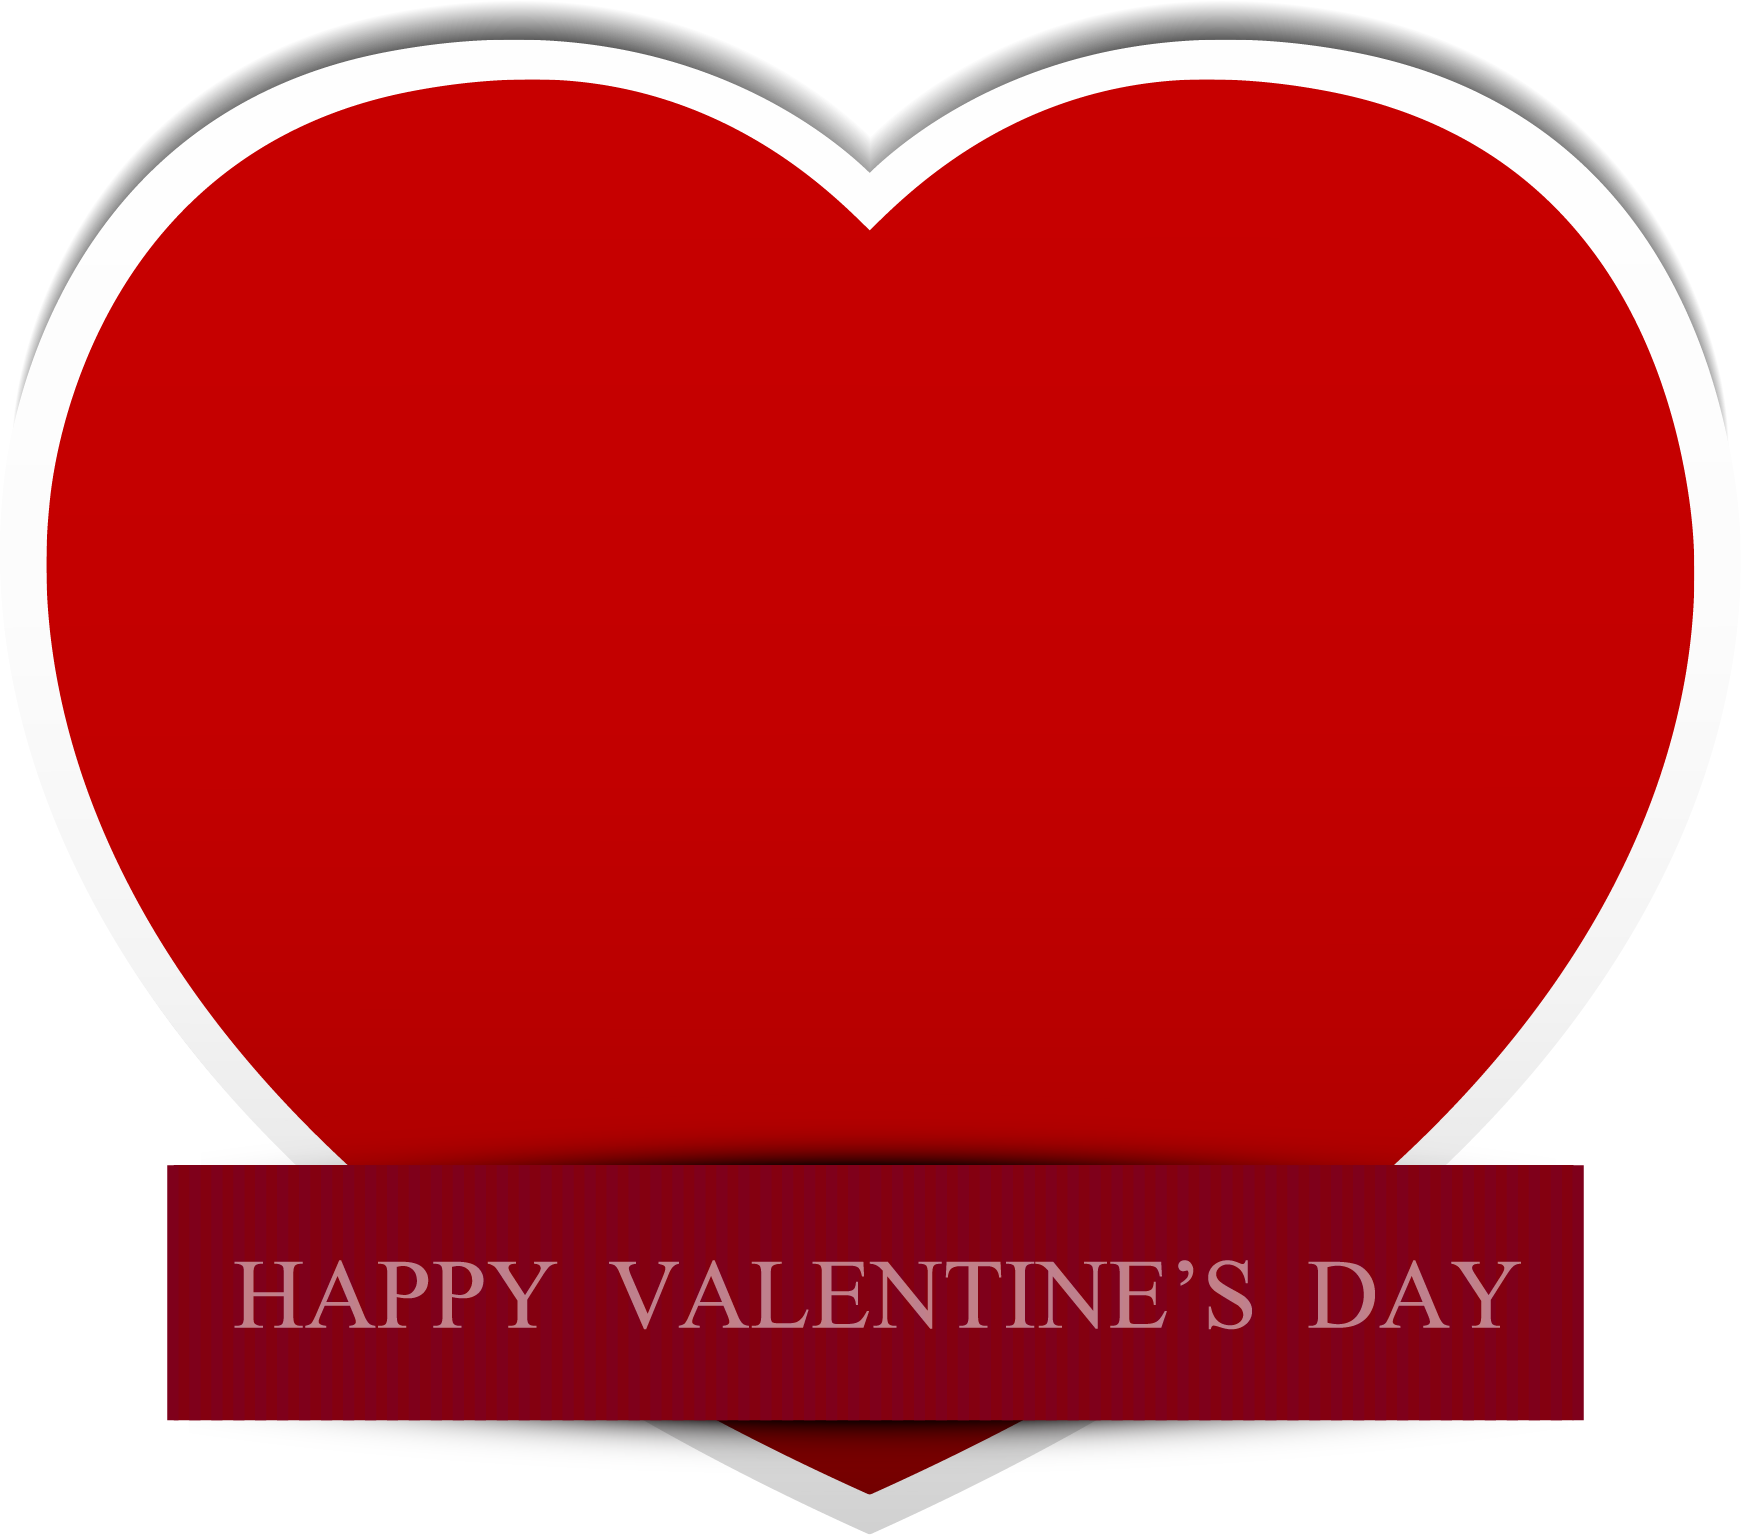 Red Valentines Day Heart Clip art.